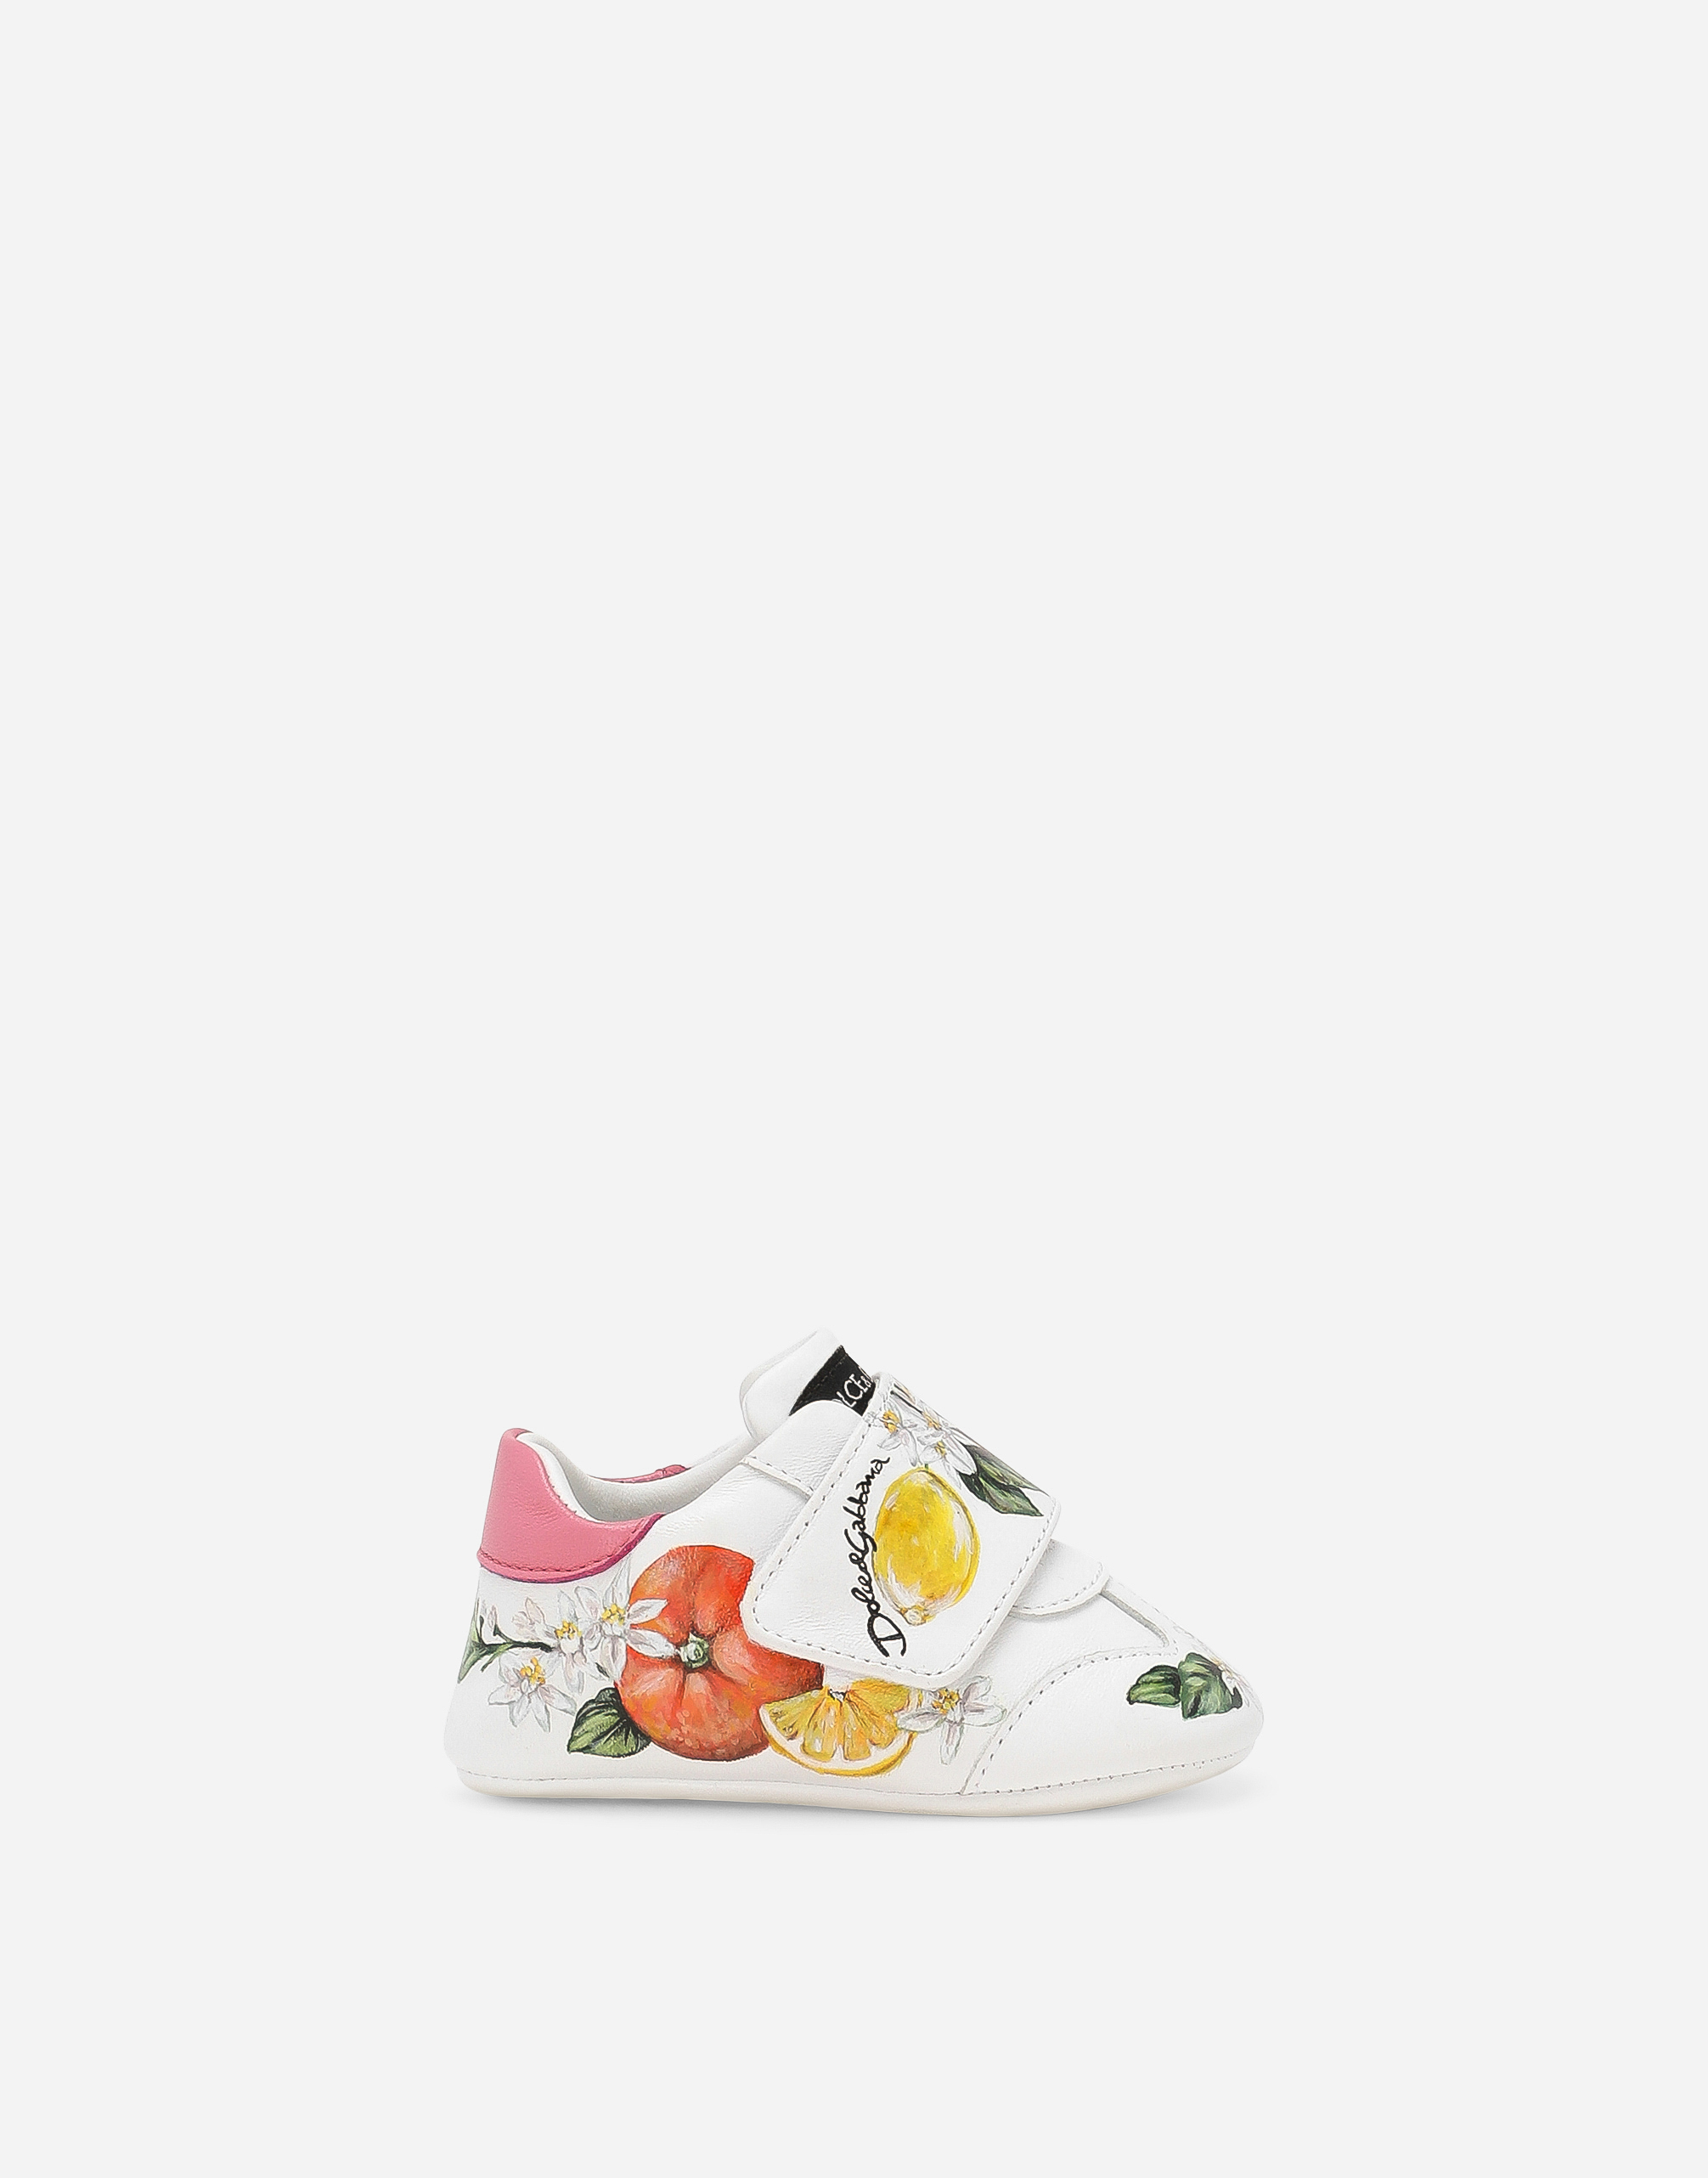 Dolce & Gabbana Printed Nappa Leather Trainers In Multi